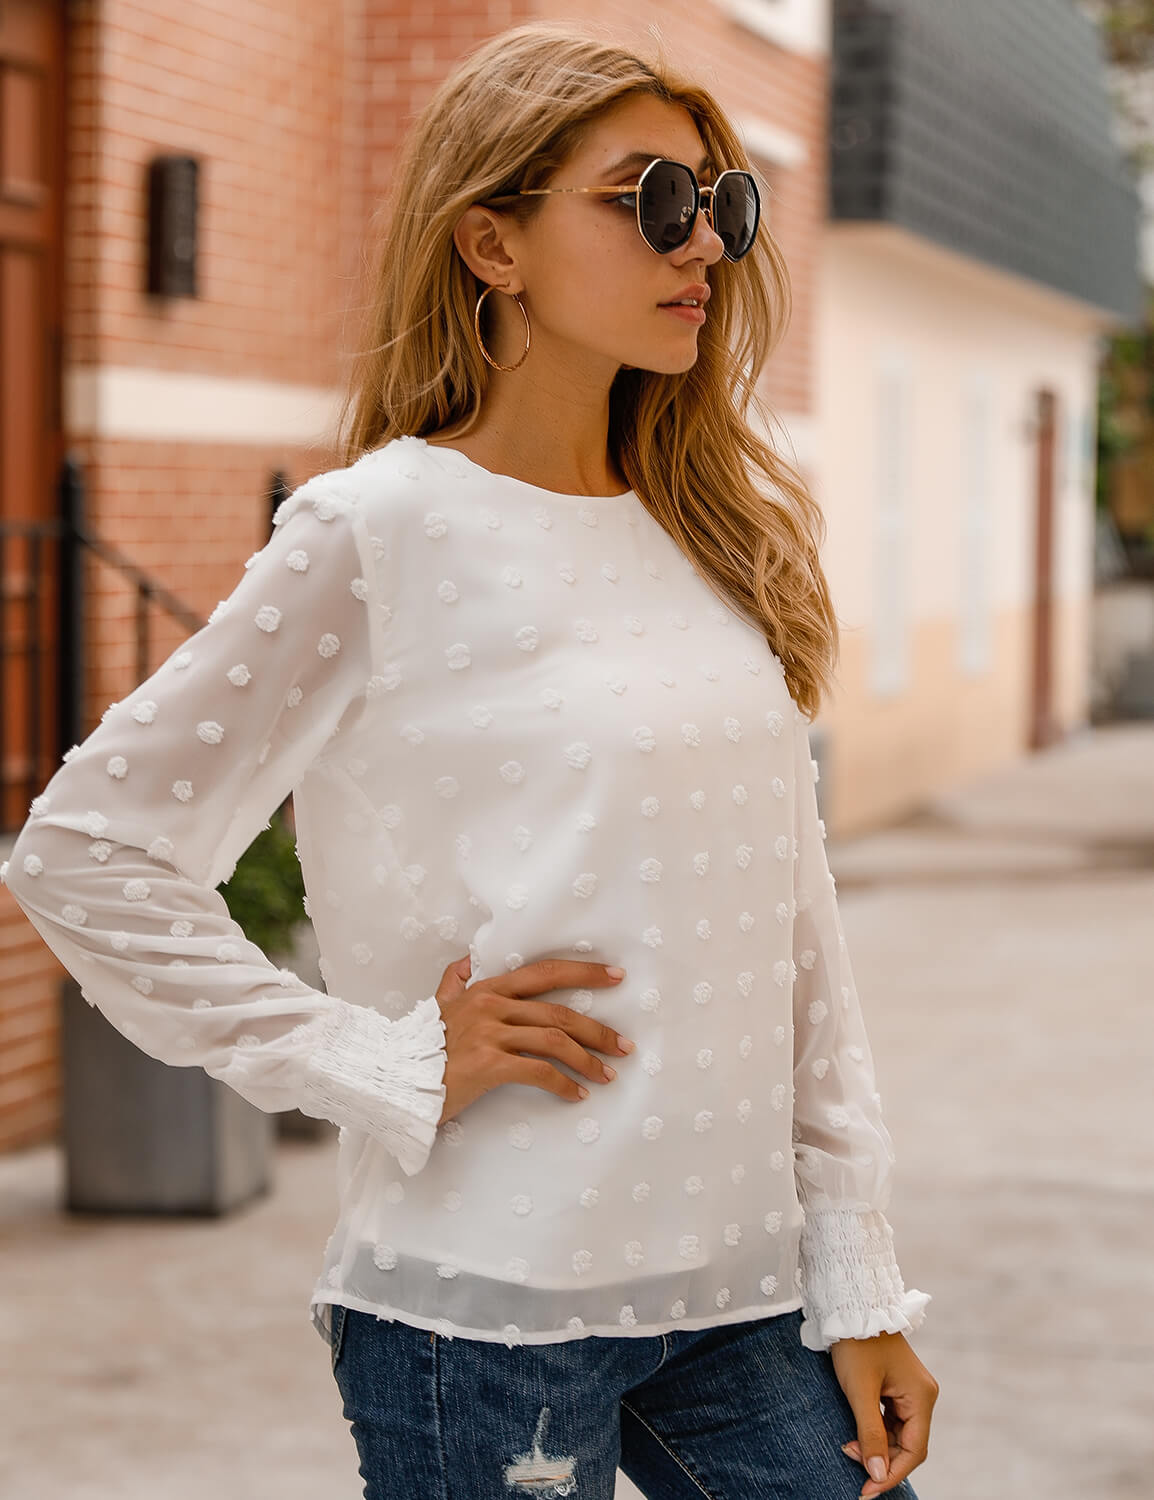 Blooming Jelly_Chic Puff Sleeves Dotted Layered Blouse_Pom Pom Details_153463_19_Elegant Women Fashion Outfits_Tops_Blouse